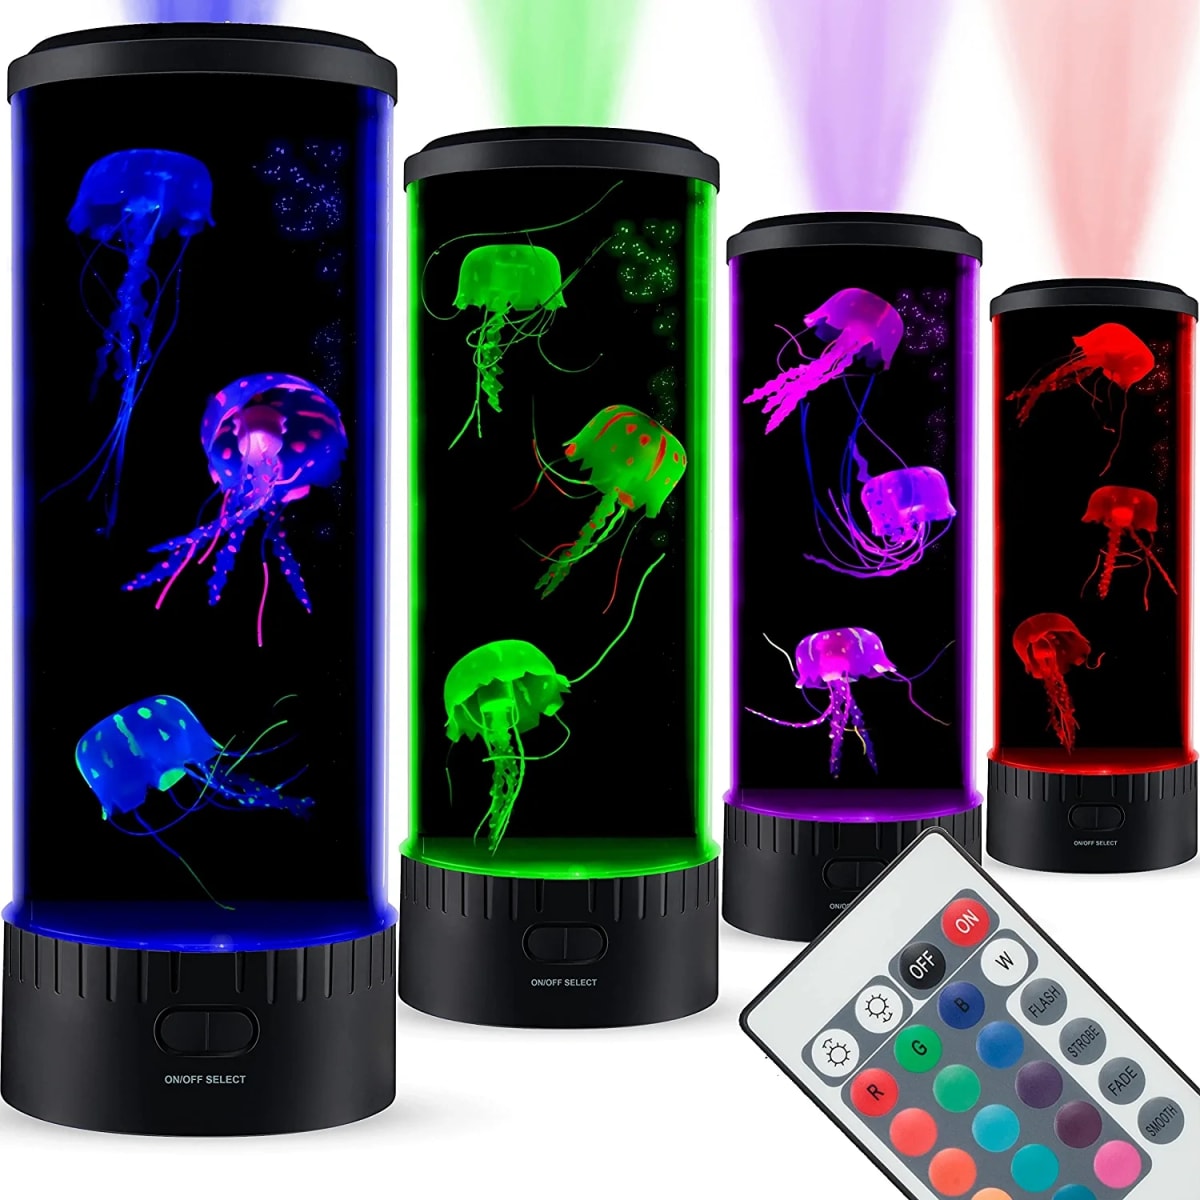 Large LED Jellyfish Lava Lamp Aquarium - Electric Round Jellyfish Tank Mood Light with 3 Fake Glowing Jelly Fish, 20 Color Changing Remote, Ocean Wave Projector - Plug in Kids Night Light